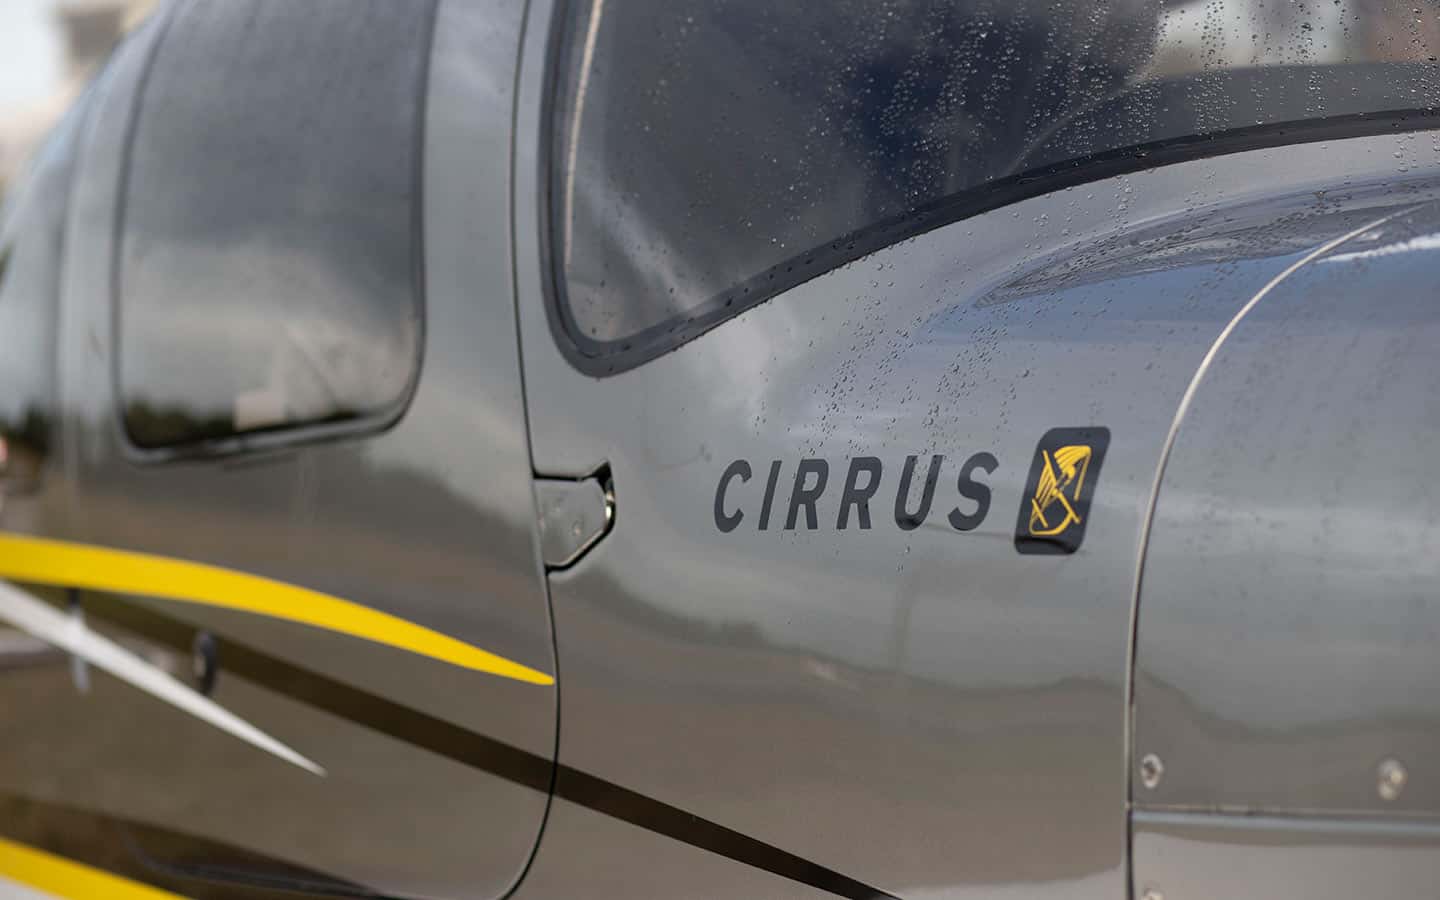 Aircraft Exterior refinishing with Cirrus paint